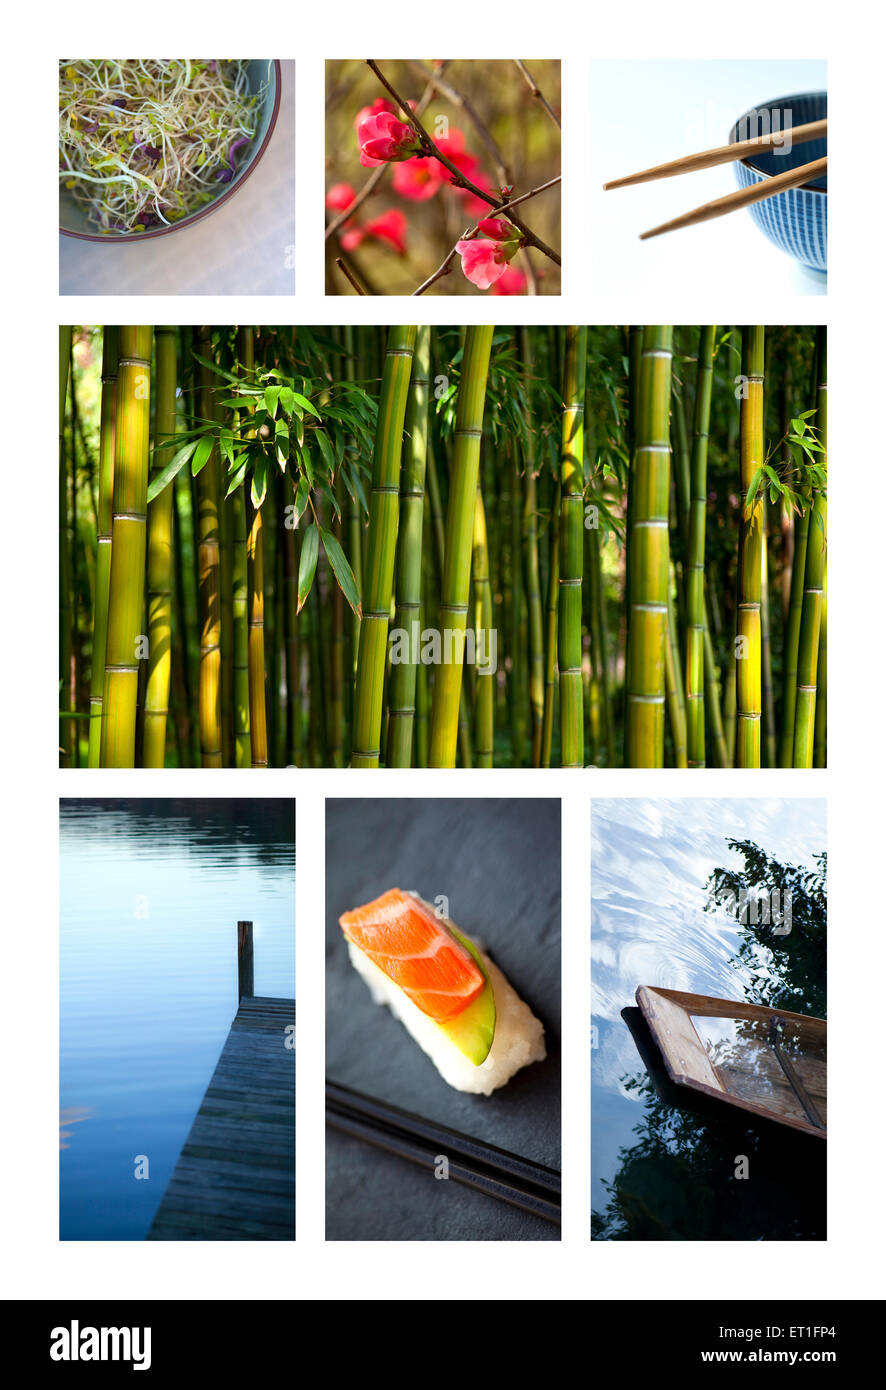 Collage of various images of Asian and Japanese lifestyle Stock Photo